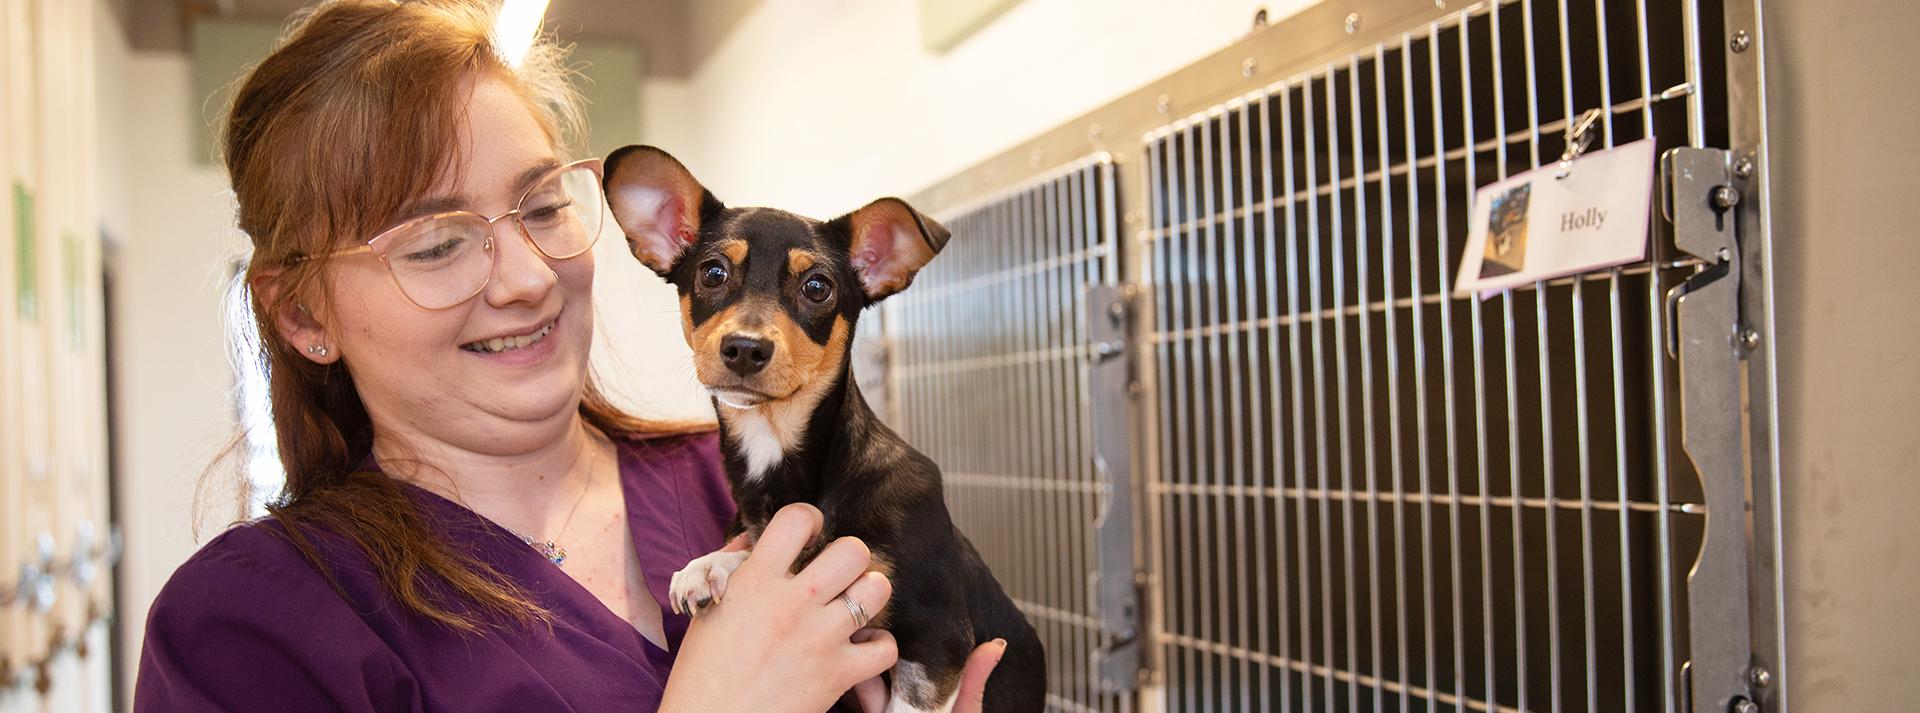 A Day in the Life of an Animal Shelter Volunteer